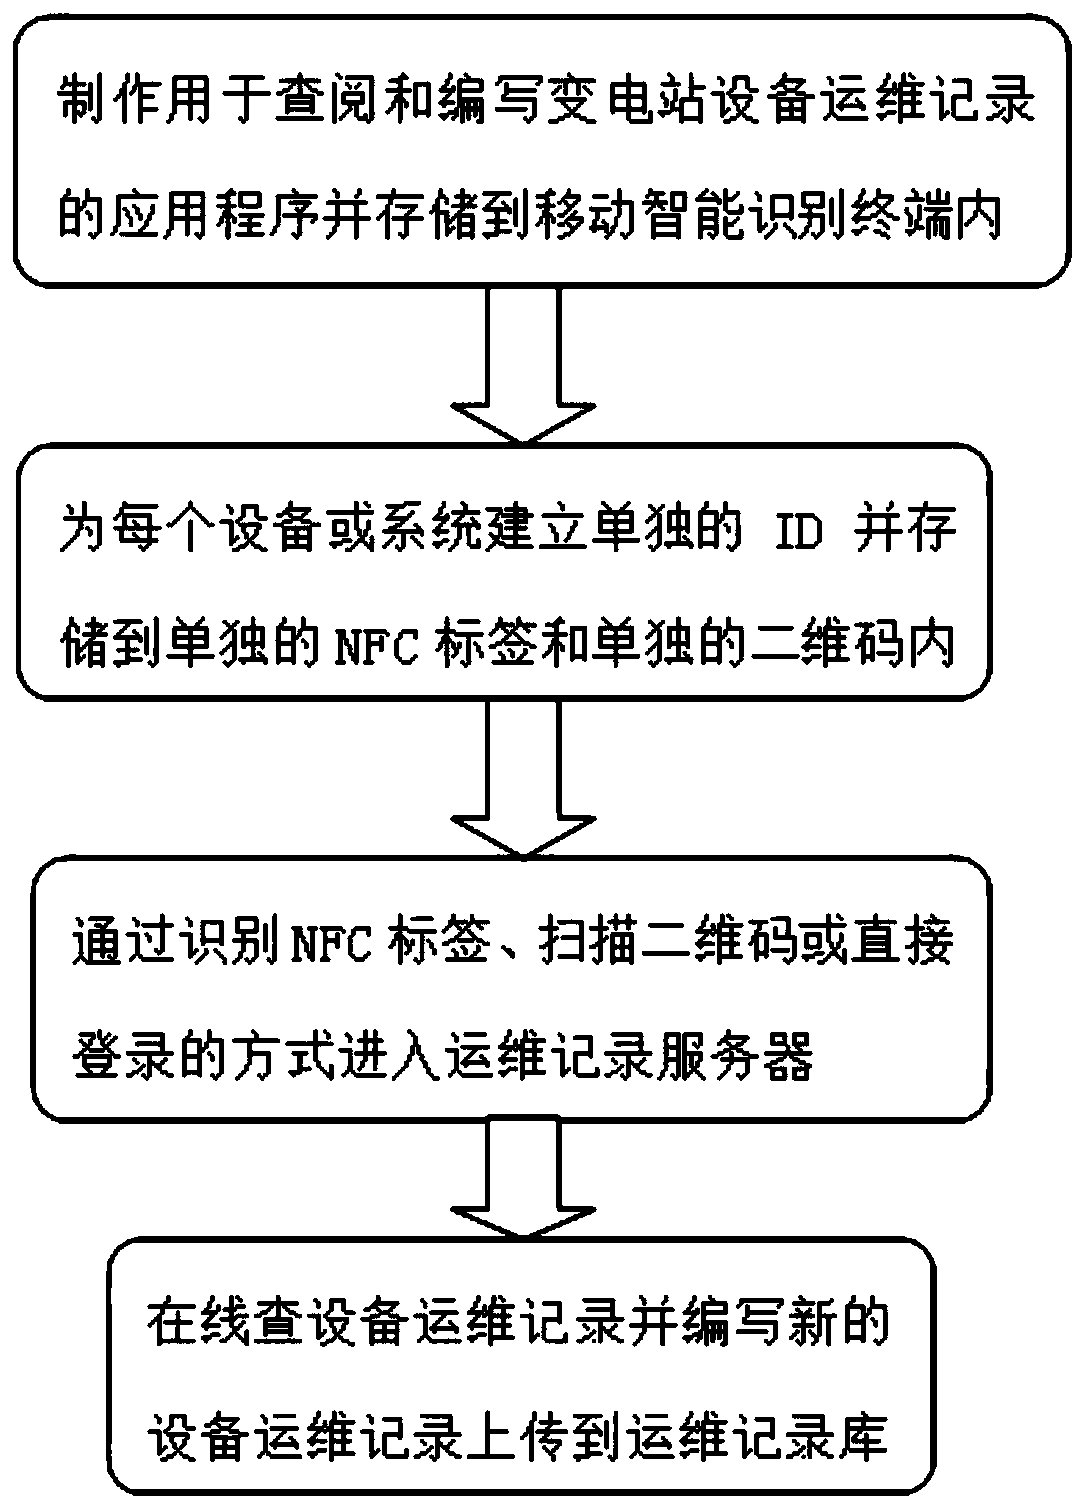 NFC two-dimensional code collaborative equipment operation and maintenance recording system and NFC label